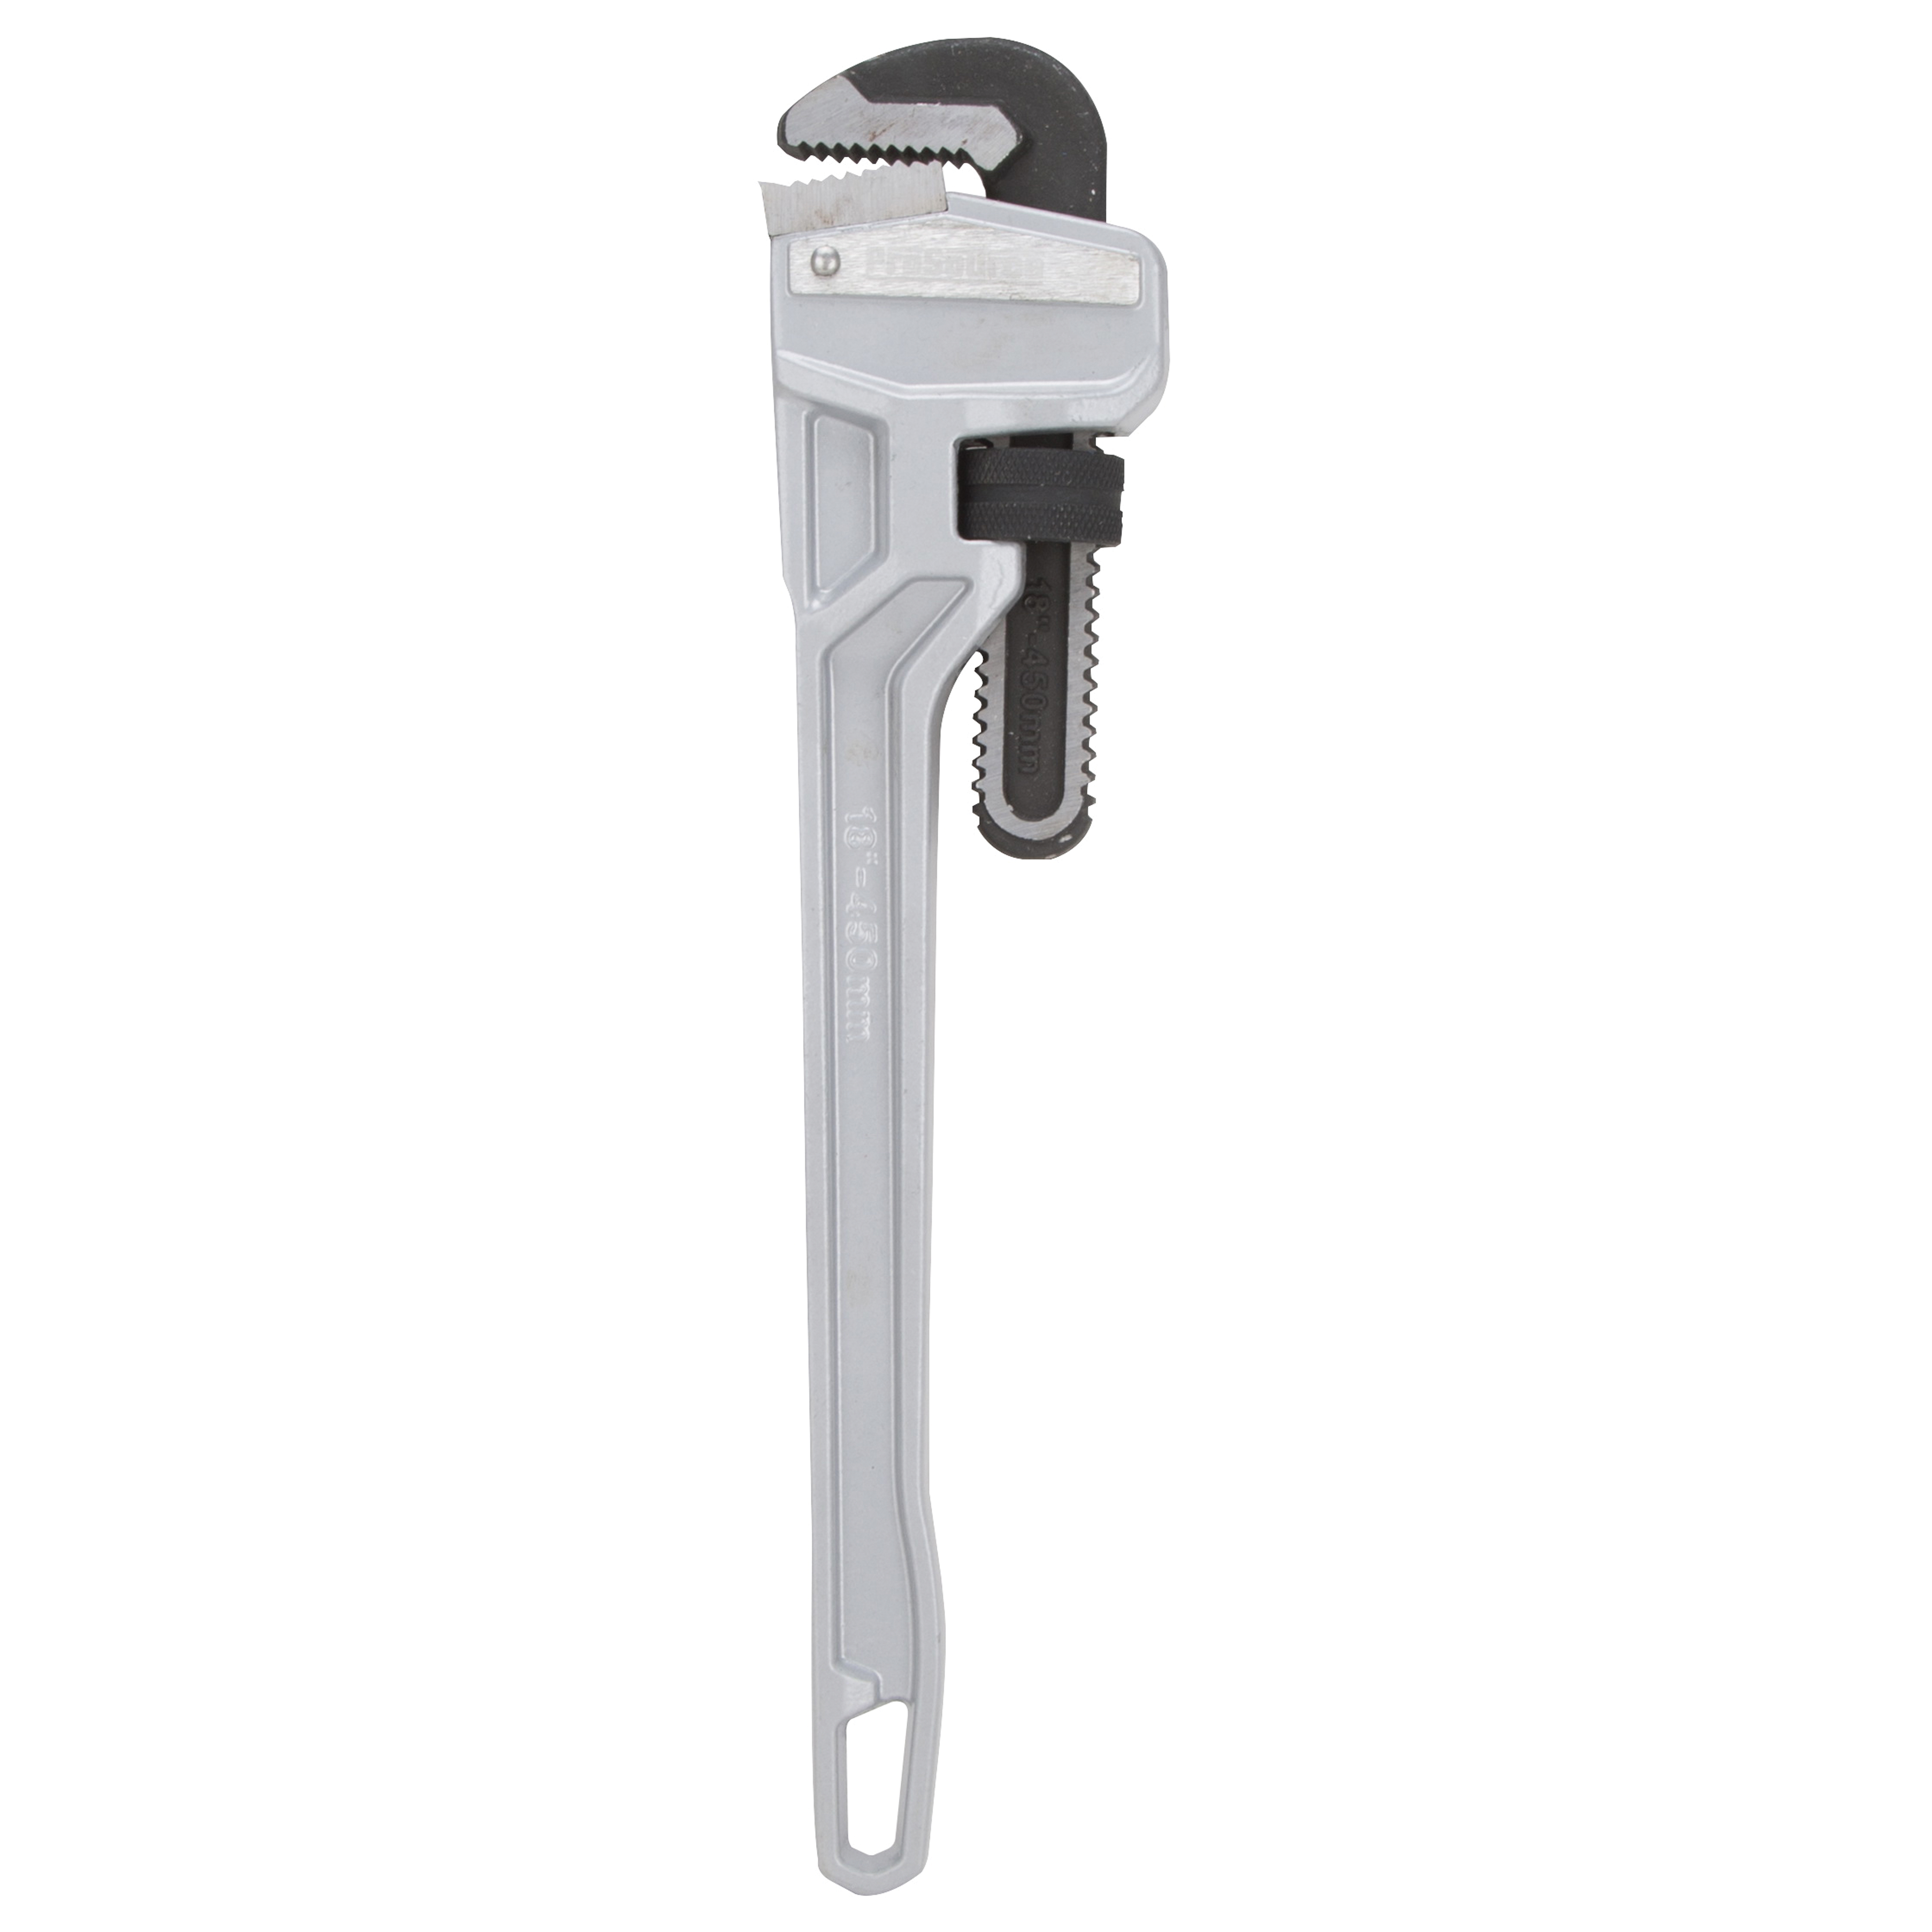 JL40141 Pipe Wrench, 50 mm Jaw, 18 in L, Serrated Jaw, Aluminum, Powder-Coated, Heavy-Duty Handle